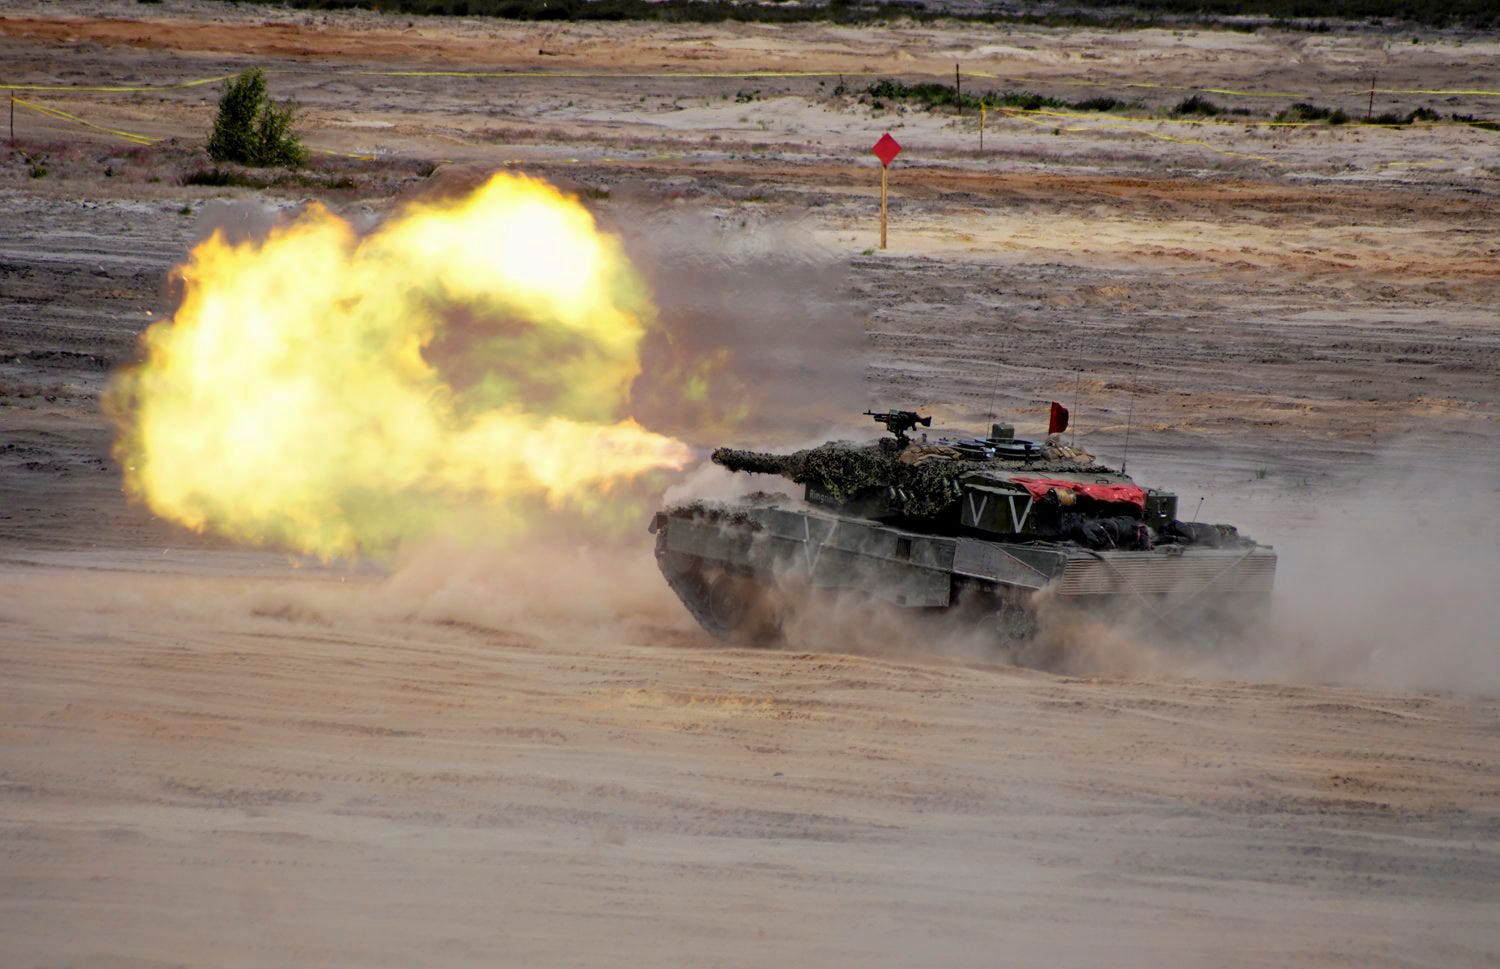 NATO Very High Readiness Joint Task Force tank firing exercise